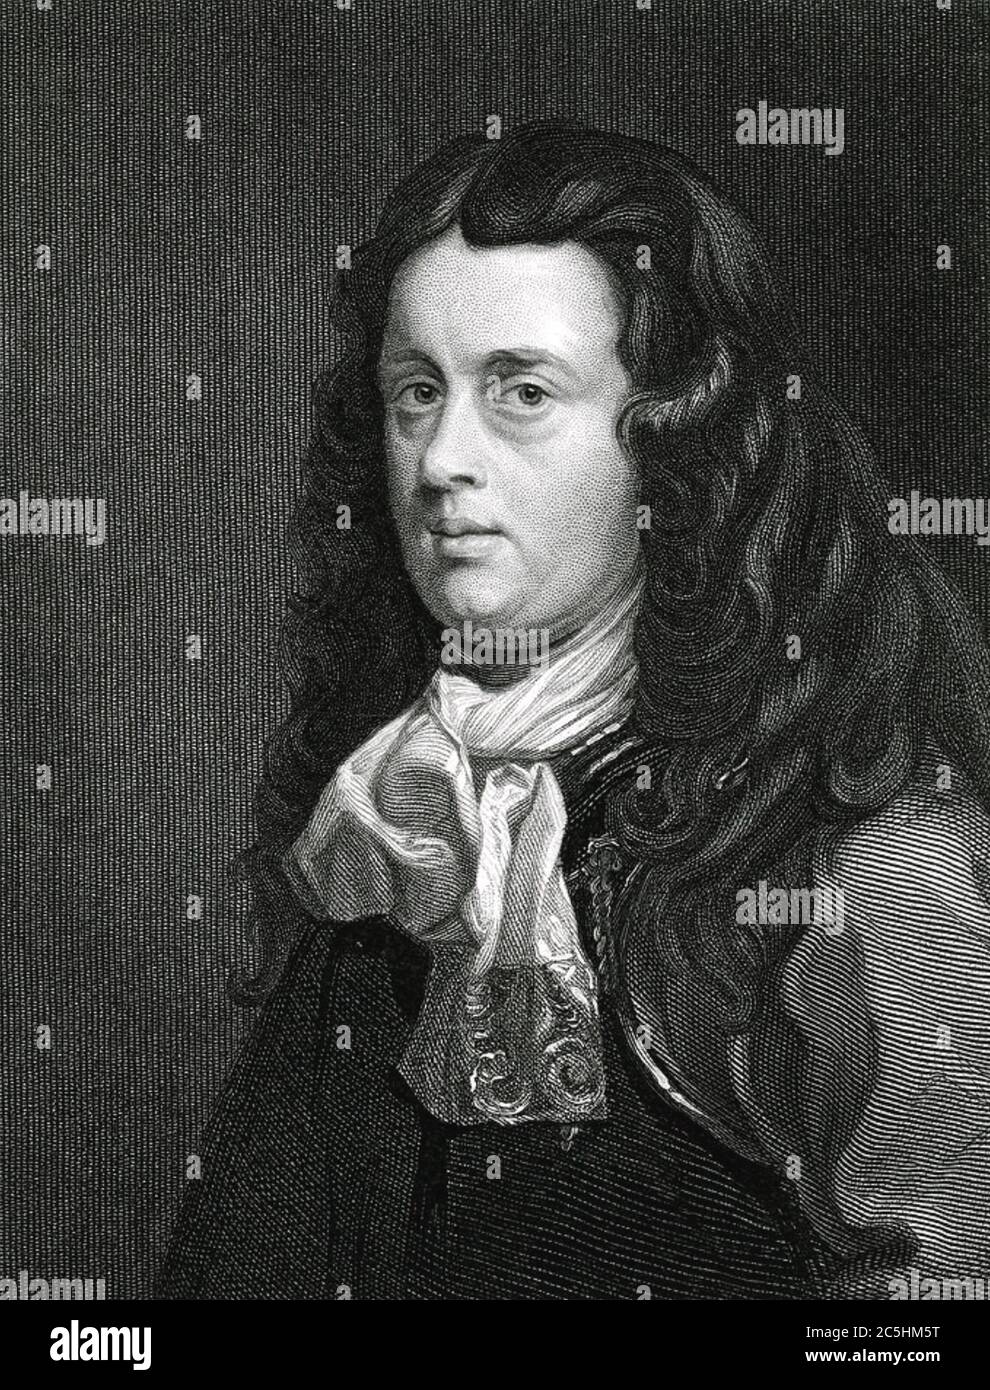 ROBERT BLAKE (1598-1657) Englisch Naval Commander of the Commonwealth Forces during the Civil war Stockfoto